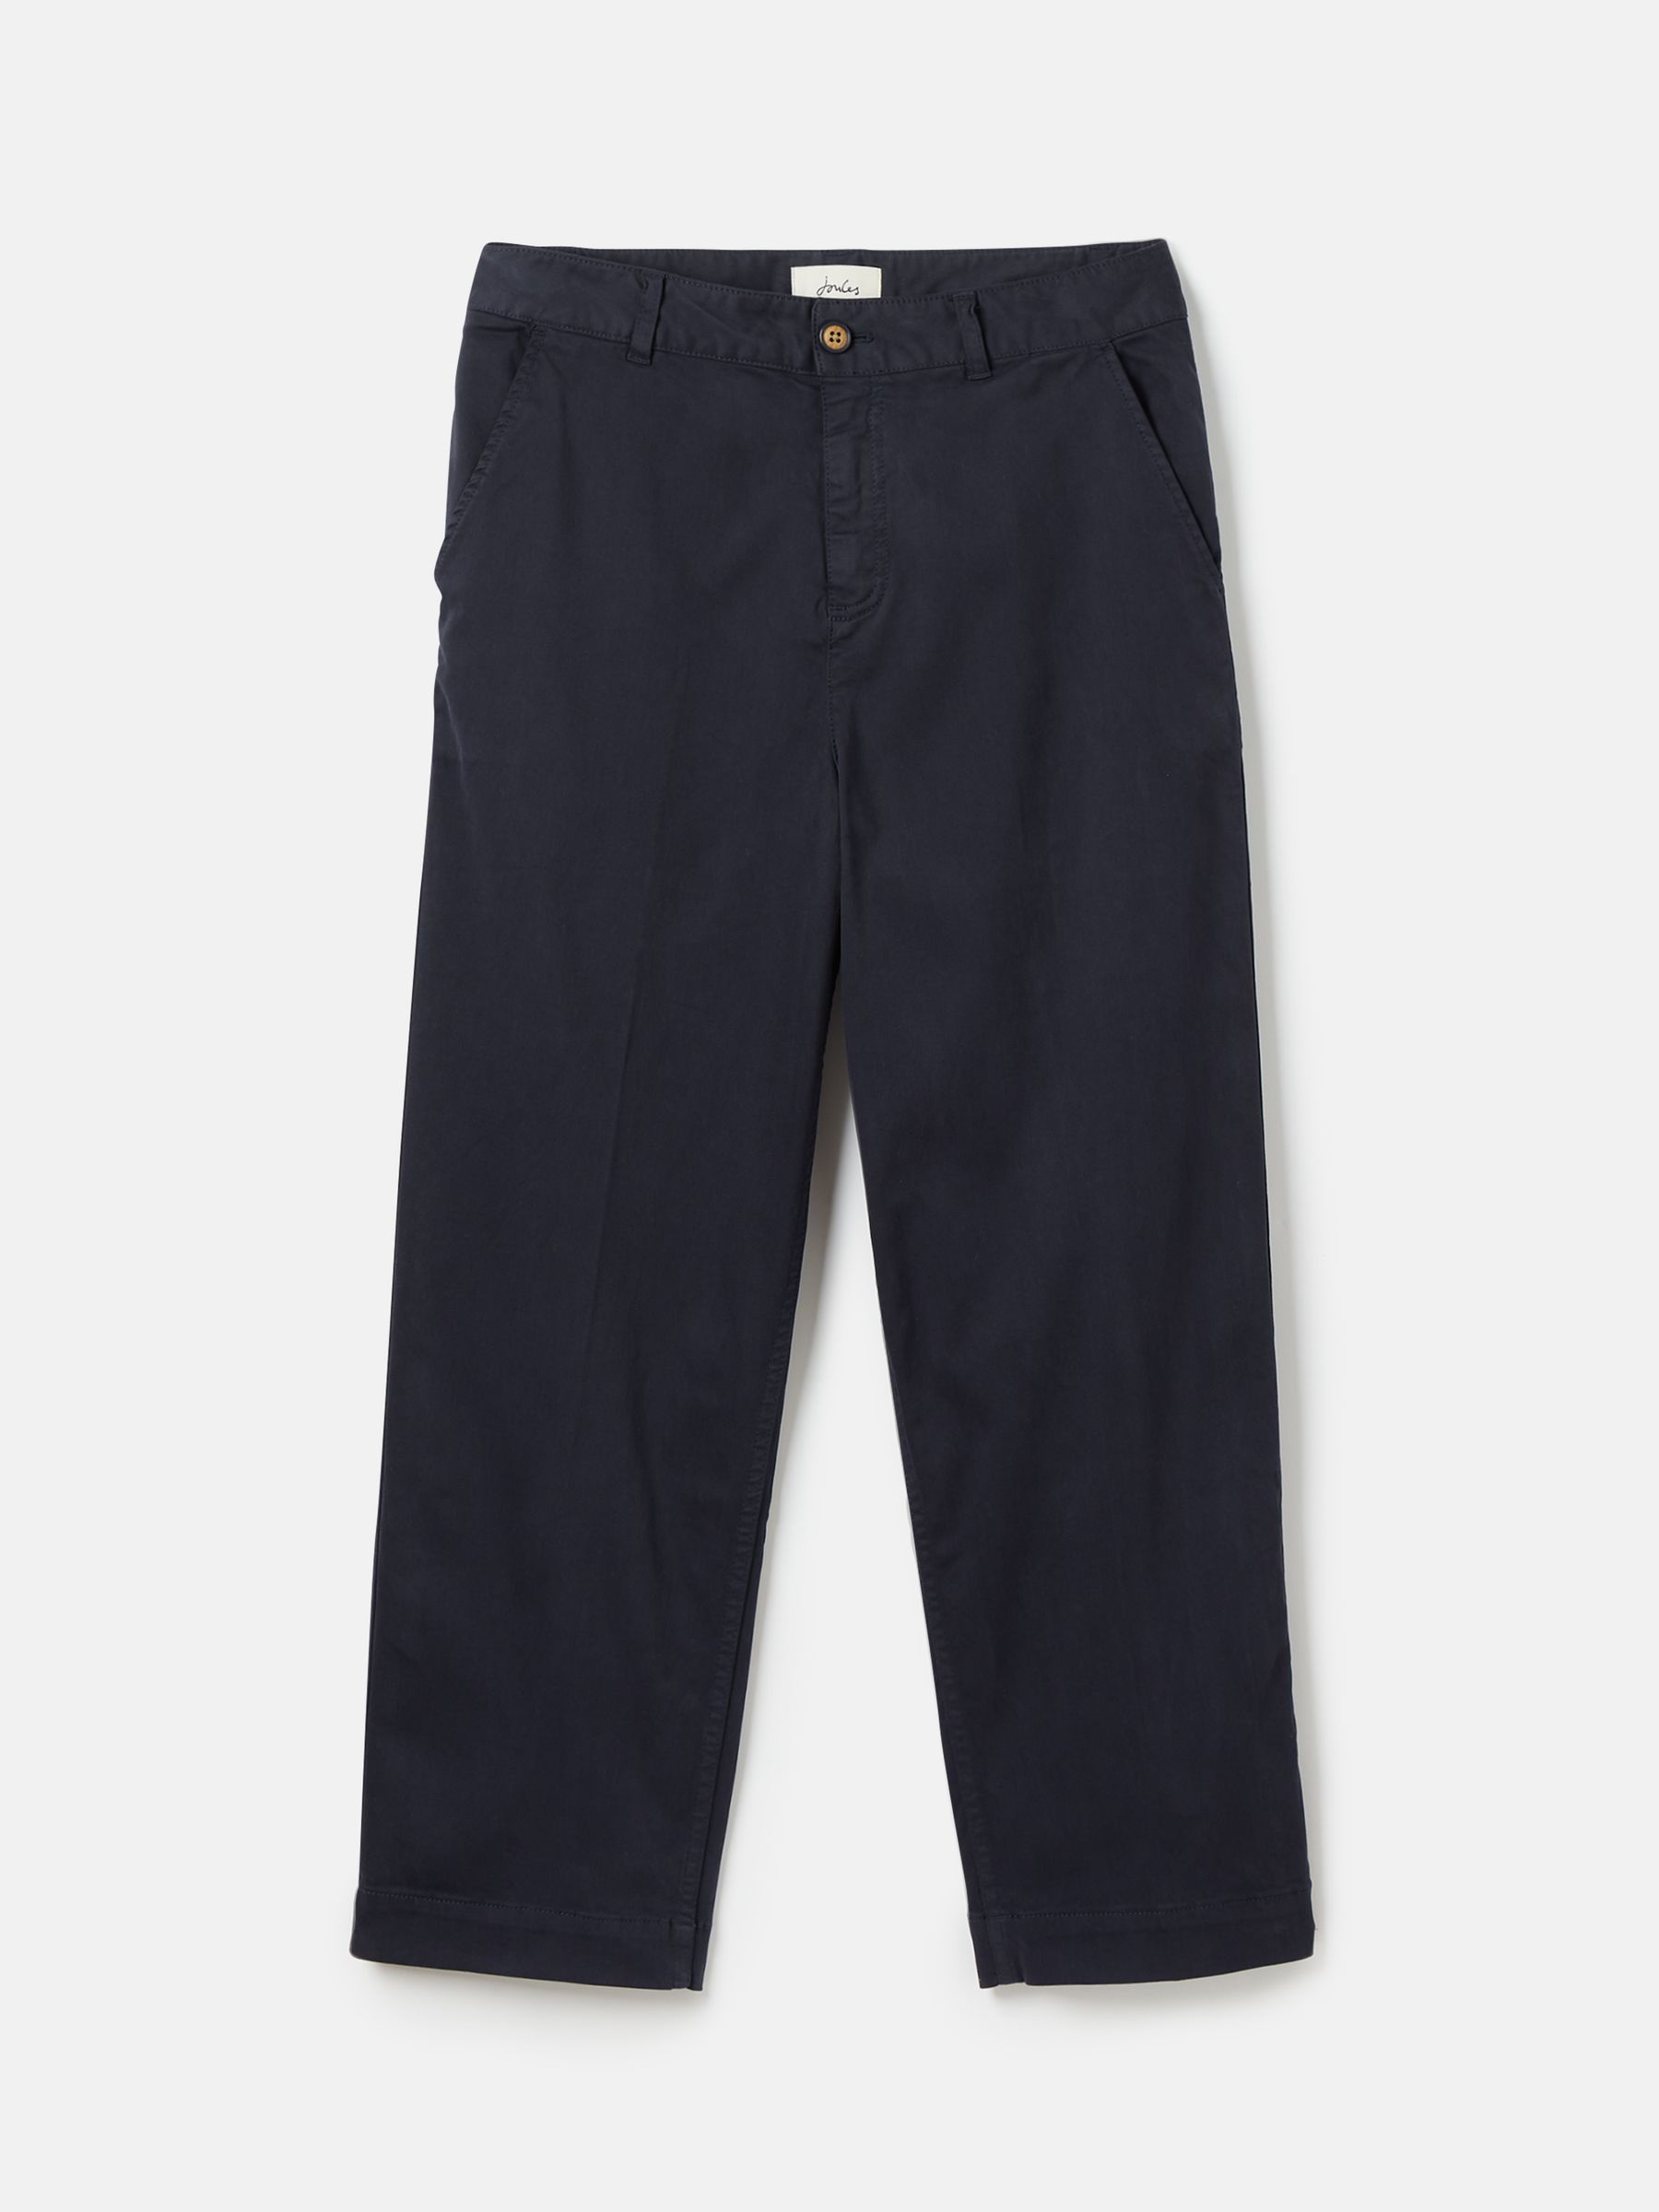 Buy Cedar Navy Straight Leg Chinos from the Joules online shop